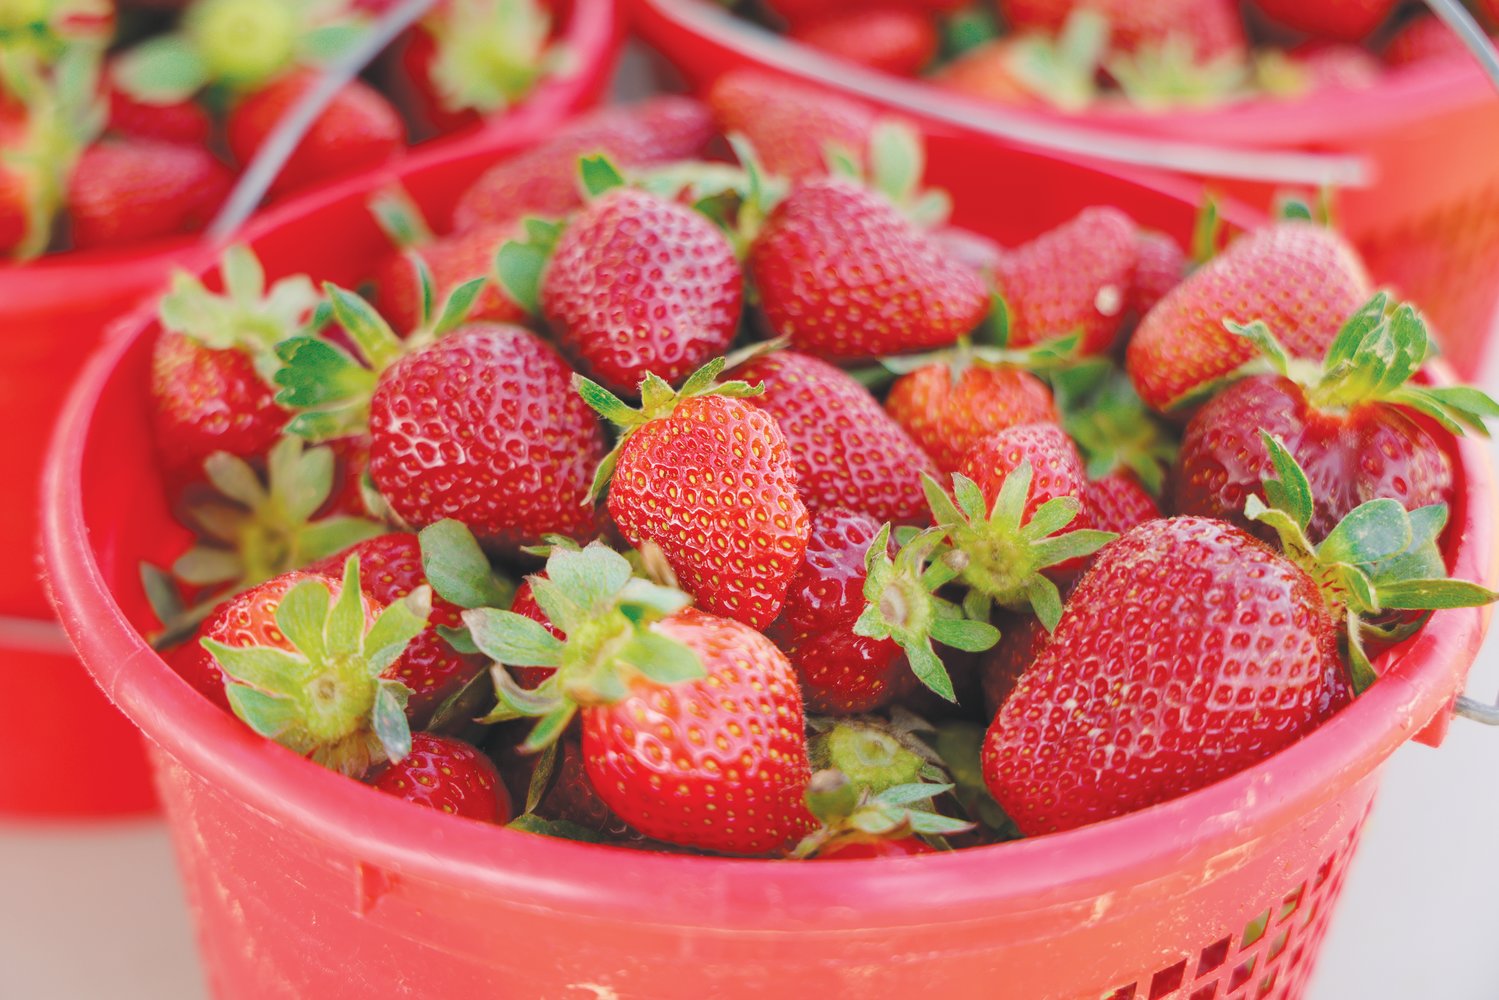 A bucket of fresh strawberries is ready for purchase at Kildee Farm.